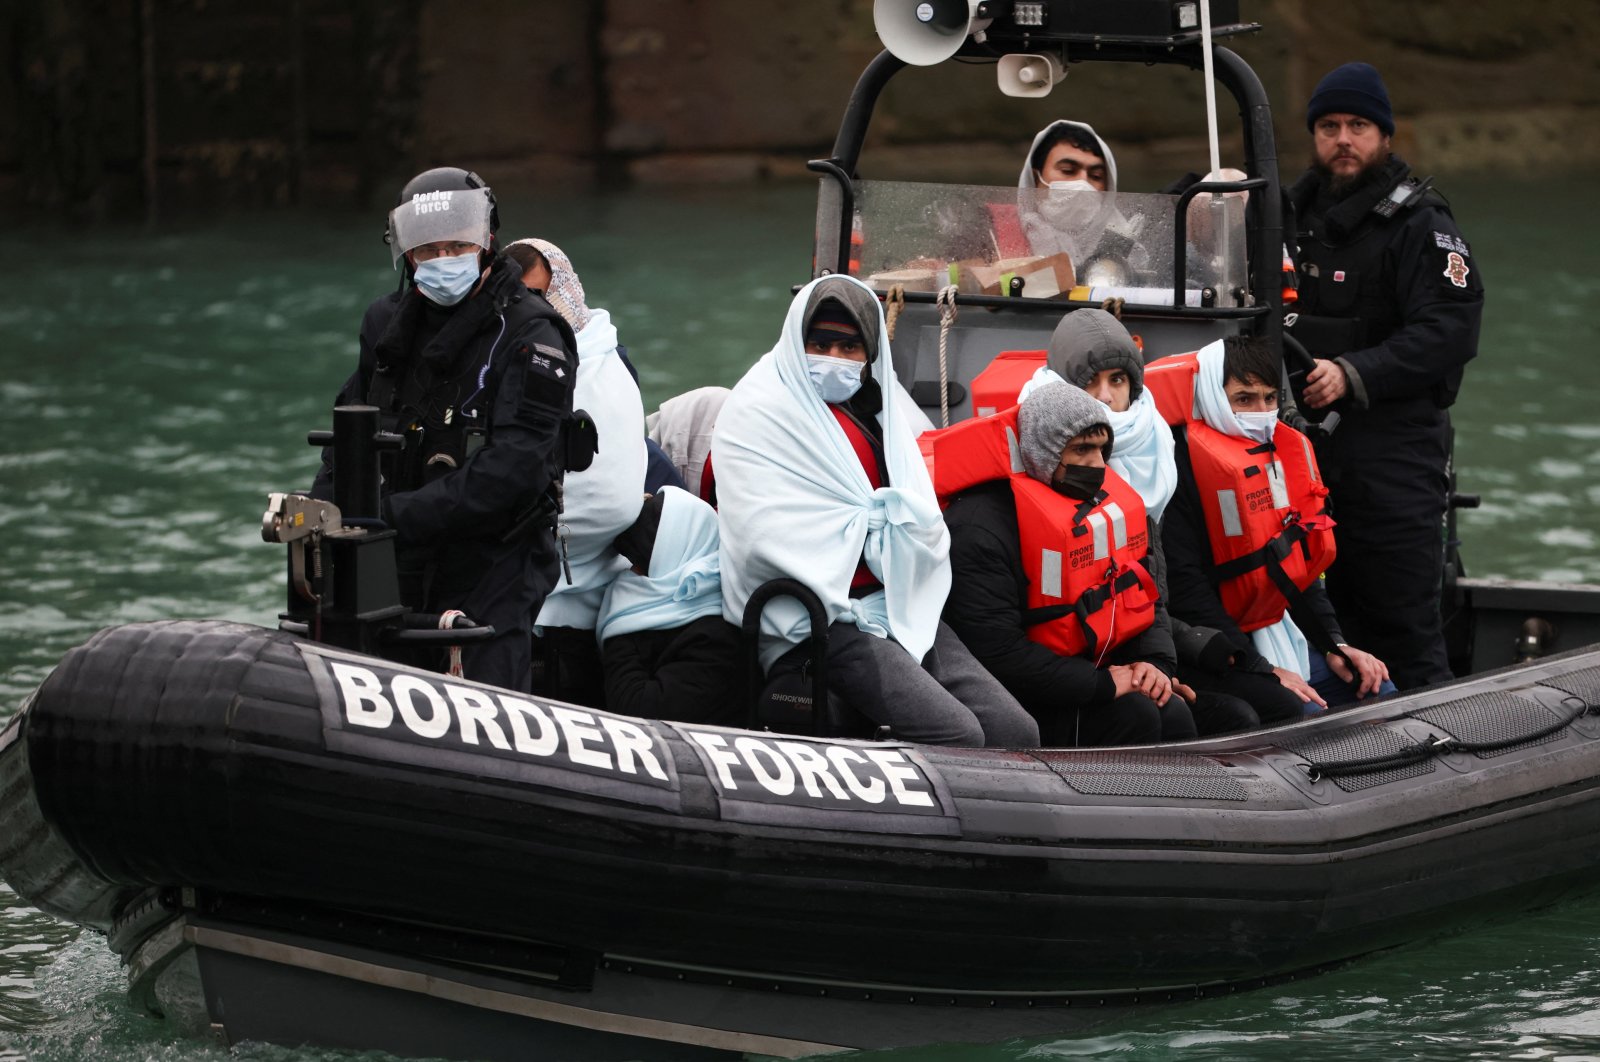 Migrants arrive at the Port of Dover on board a Border Force vessel after being rescued while crossing the English Channel, in Dover, Britain, Dec. 17, 2021. (Reuters Photo)